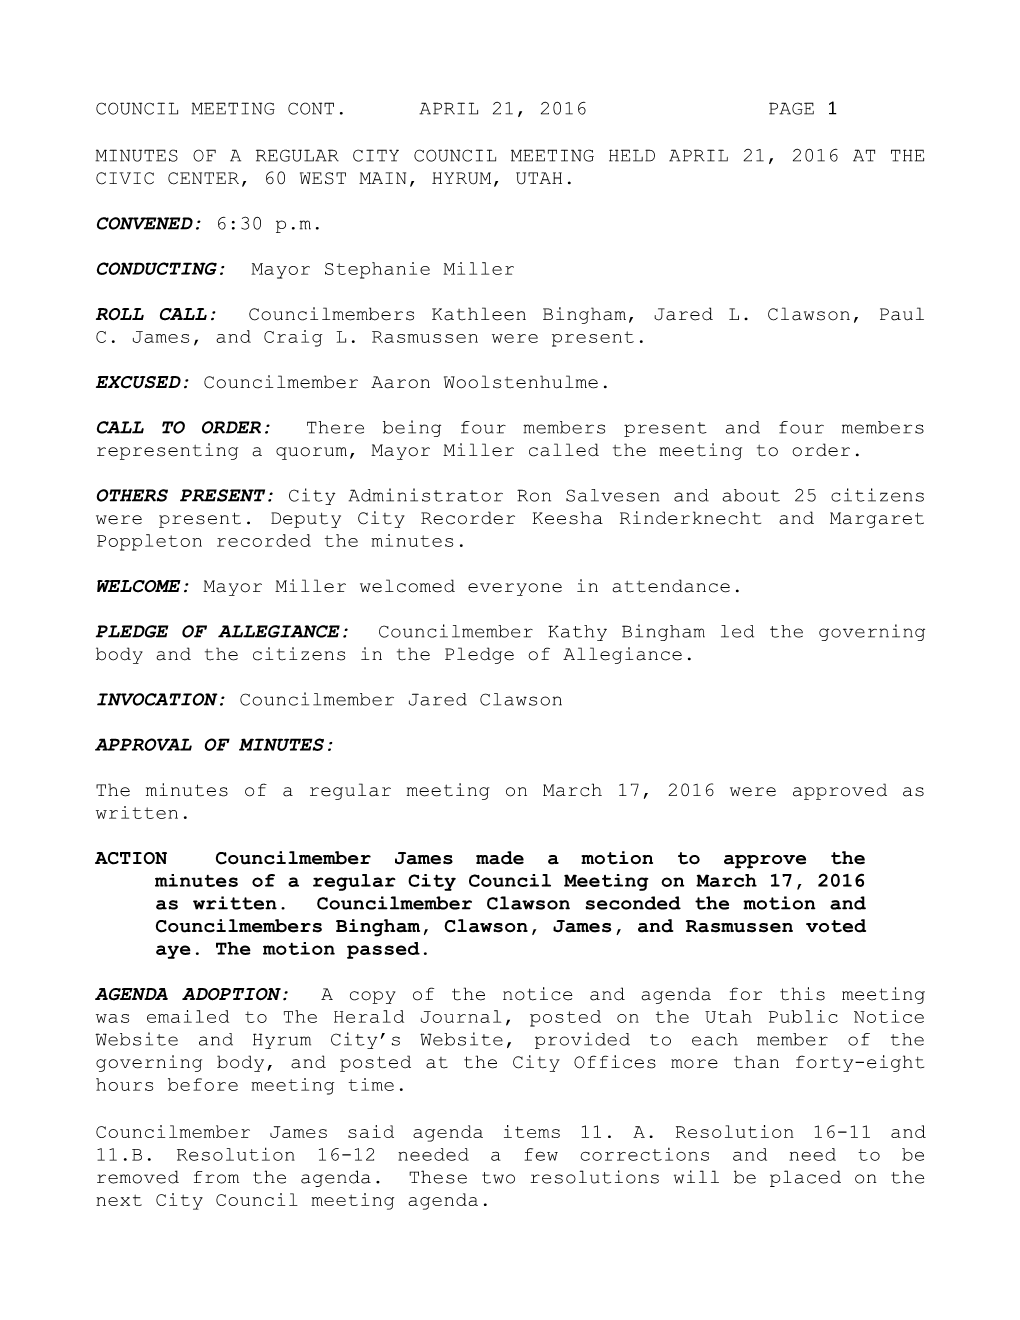 Minutes of a Regular City Council Meeting Held January 8, 2004 at the Civic Center, 83